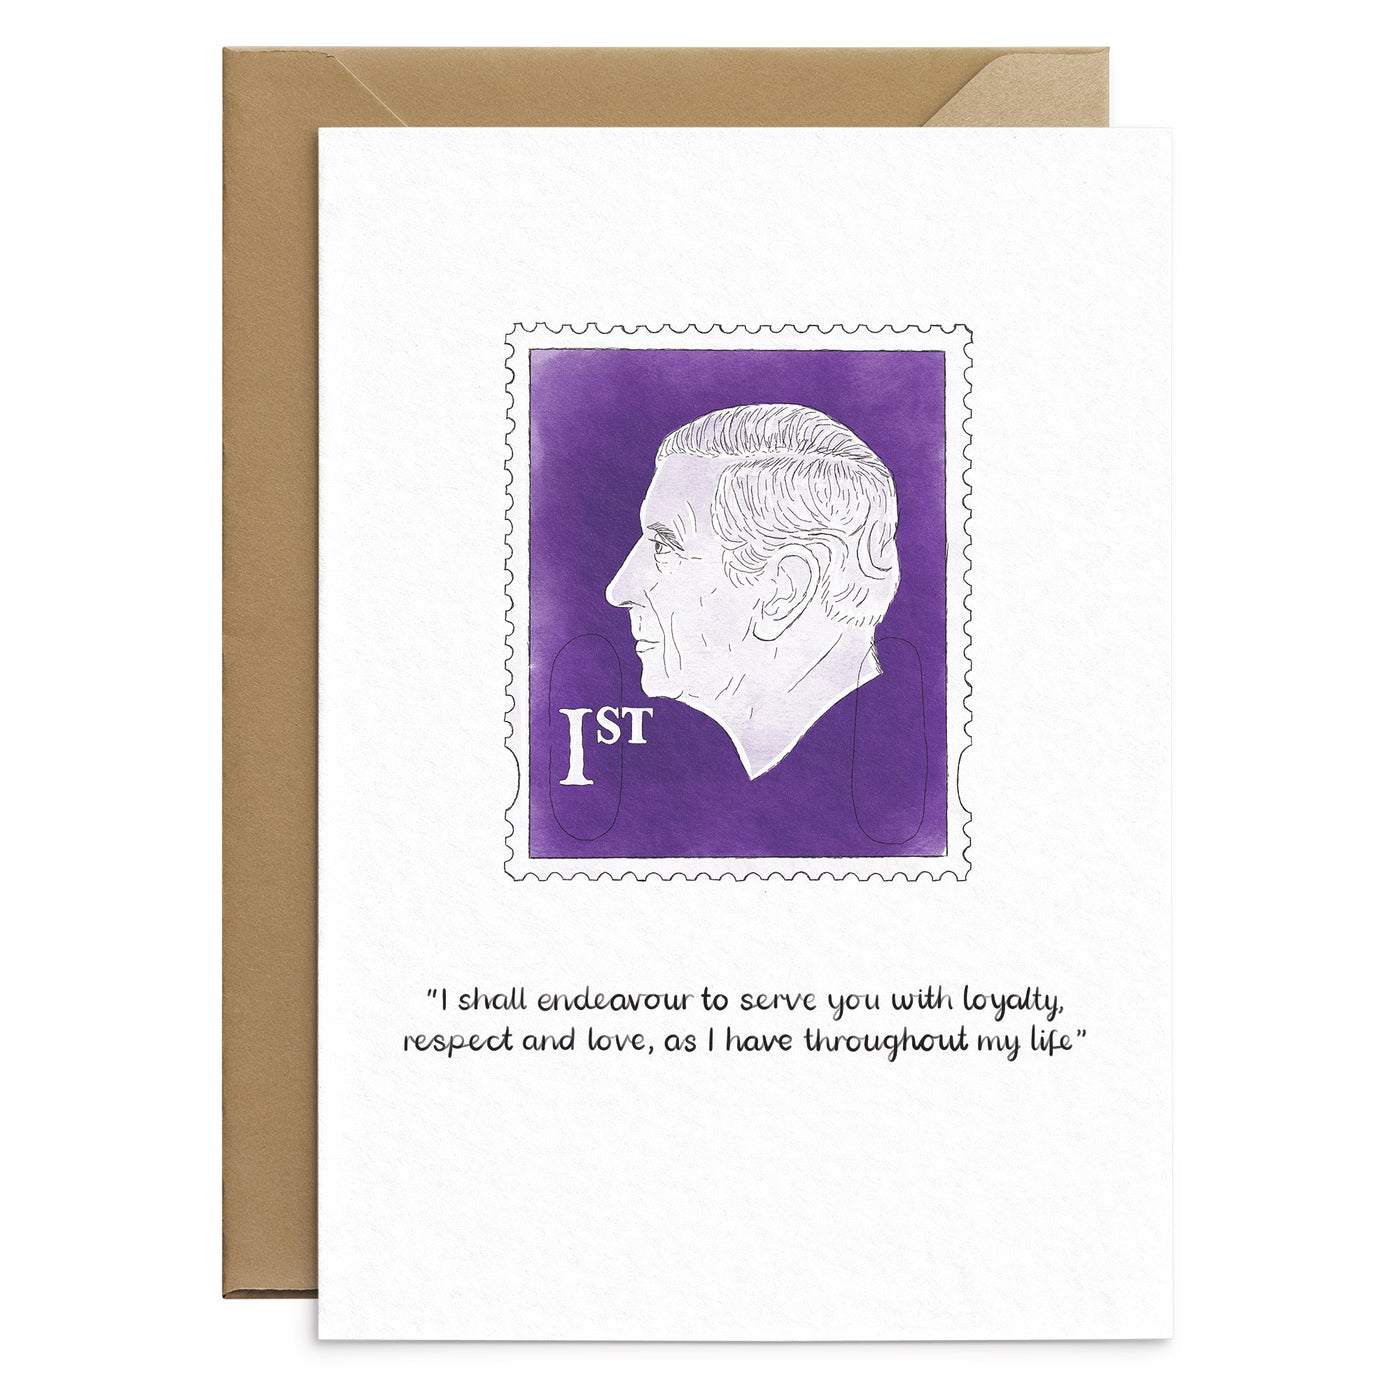 King-Charles-Coronation-Stamp-Greetings-Card-With-Charles-III-quote-Poppins-and-co